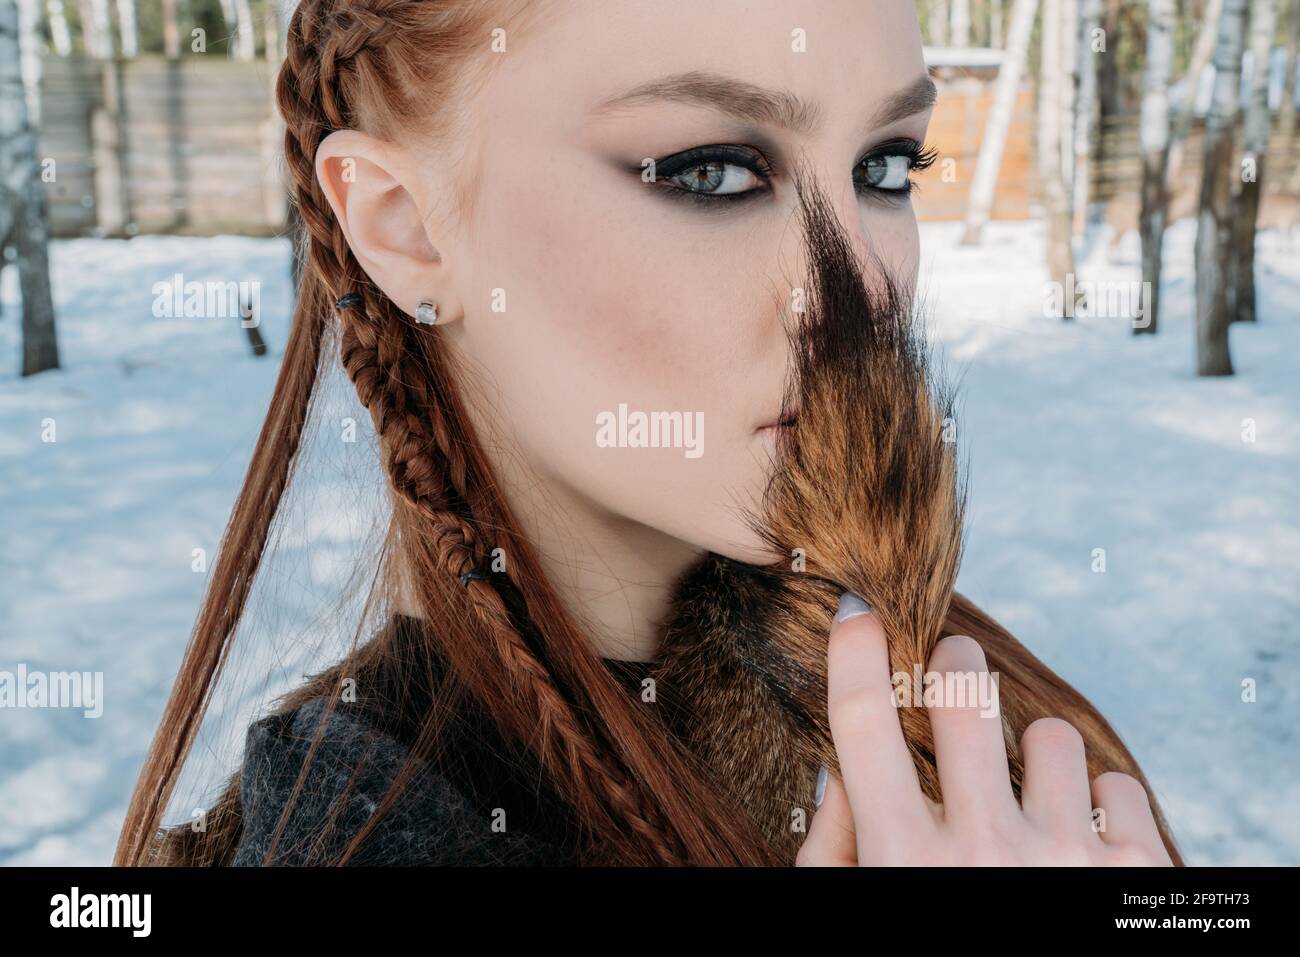 Young woman with red hairs and dreadlocks, dark smokey eyes make-up looking in the camera Stock Photo